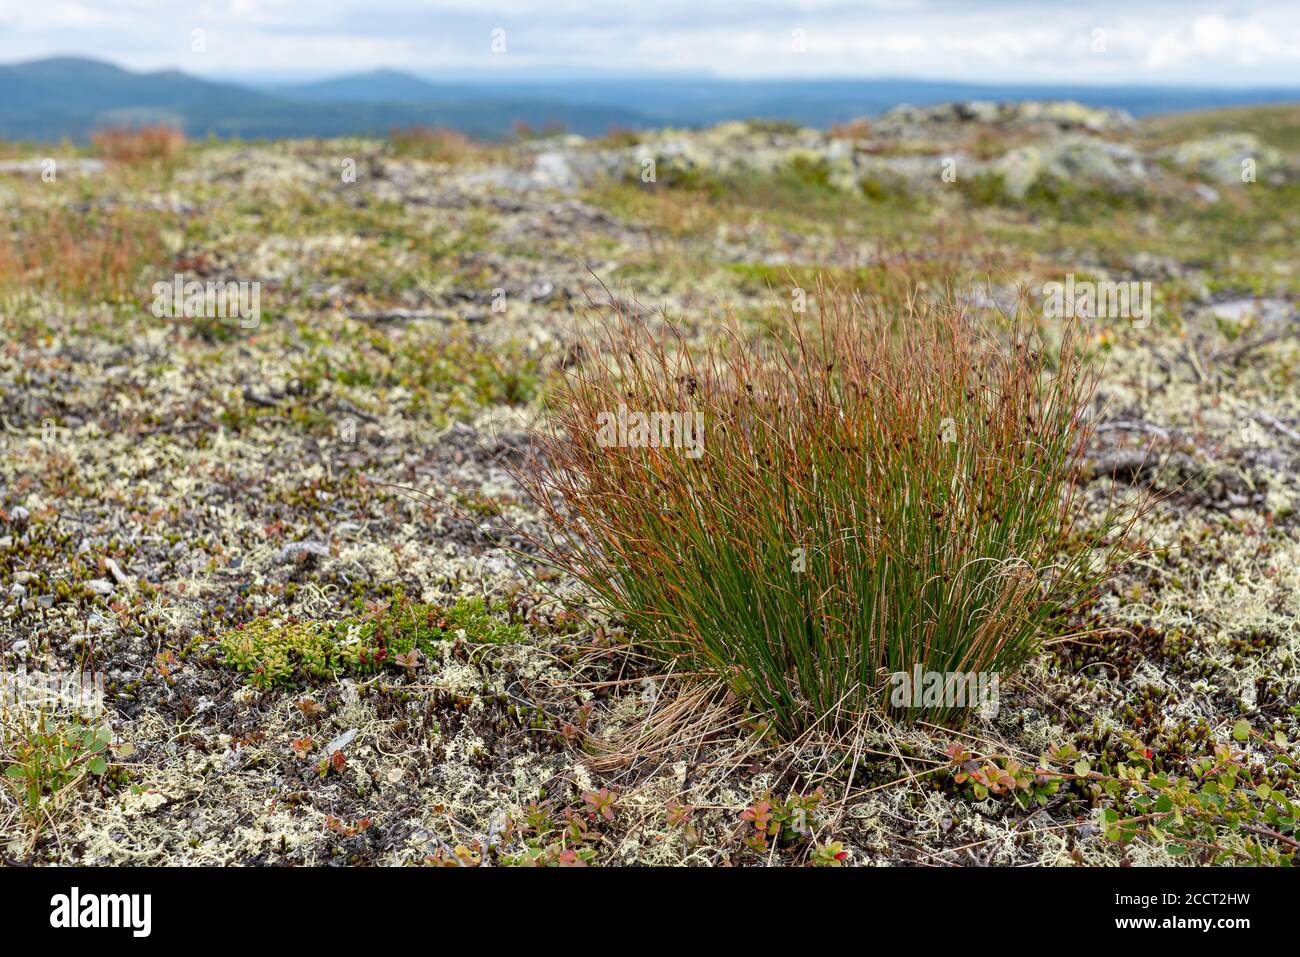 Sedge plants growing amongst the lichen covered montane uplands of Oppland in central Norway Stock Photo